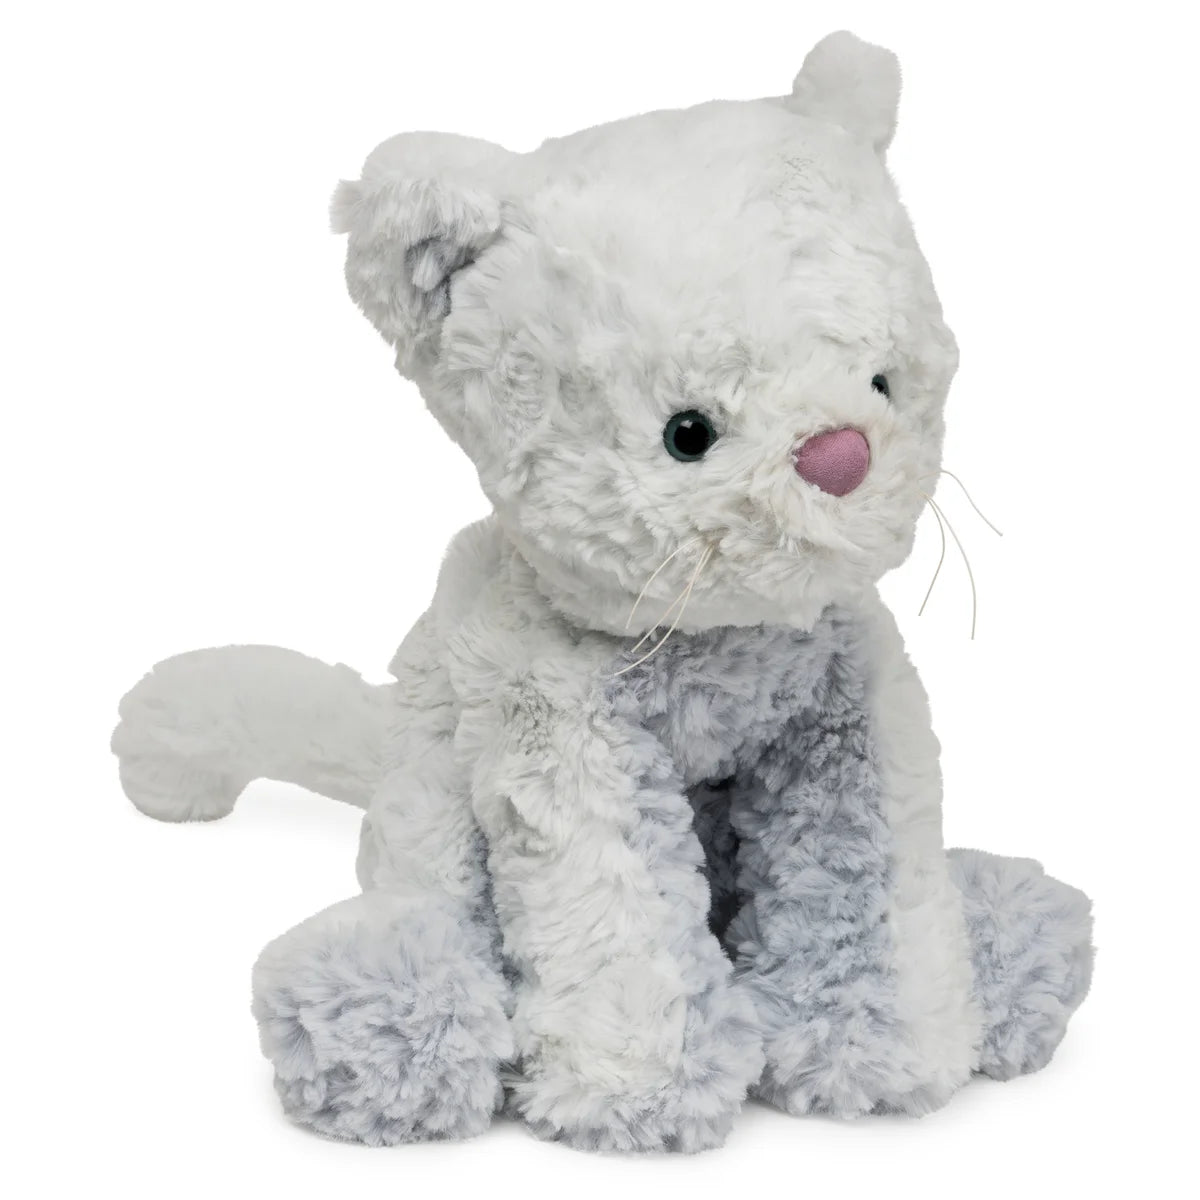 COZYS 10" CAT - Plush Toys HeretoserveyouGUND Cozys Collection Kitty Cat Plush Soft Stuffed Animal for Ages 1 and Up, Blue, 10"